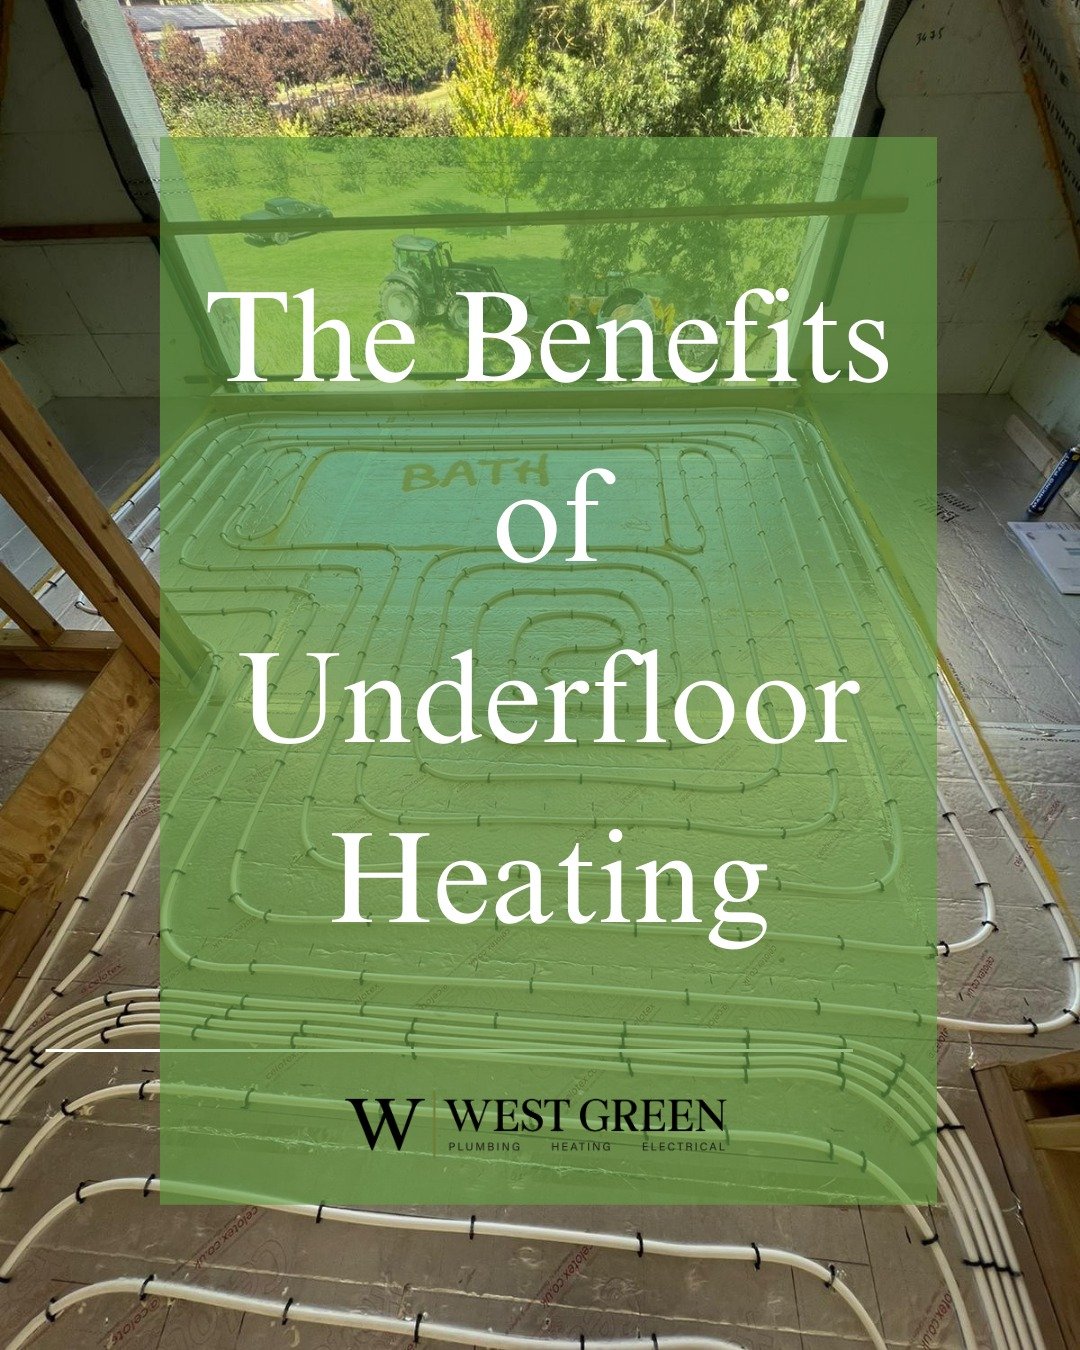 Underfloor heating offers a cosy solution that warms your space efficiently from the ground up. Unlike traditional radiators that can create hot and cold spots, underfloor heating distributes heat evenly, ensuring your room is a comfortable temperatu